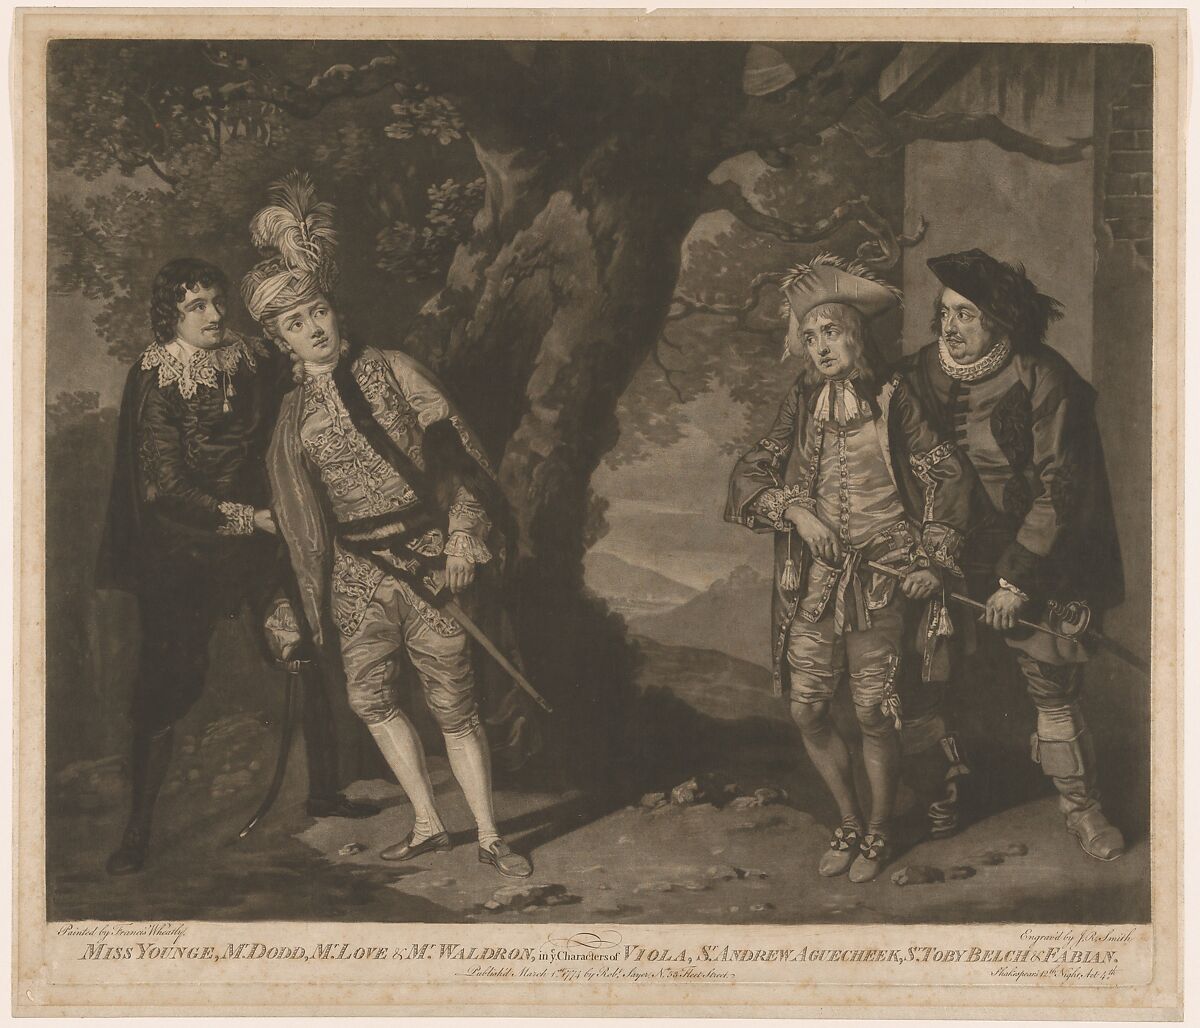 Miss Younge, Mr. Dodd, Mr. Love, and Mr. Waldron, in th Characters of Viola, Sir Andrew Aguecheek, Sir Toby Belch, and Fabian (Shakespeare, Twelfth Night, Act 3, Scene 4), John Raphael Smith (British, baptized Derby 1751–1812 Doncaster), Mezzotint; third state of three 